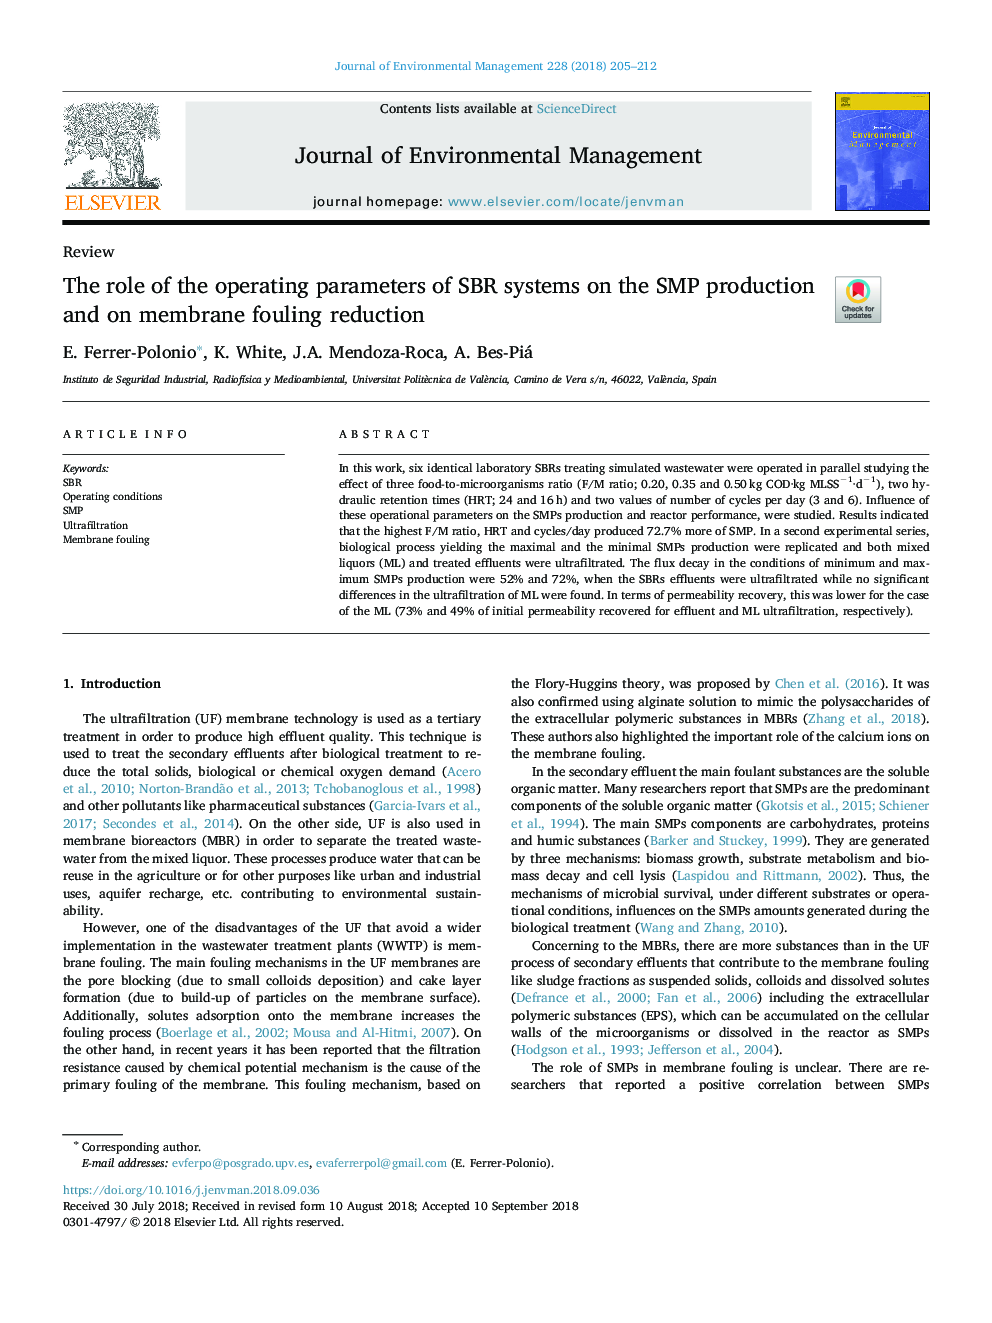 The role of the operating parameters of SBR systems on the SMP production and on membrane fouling reduction